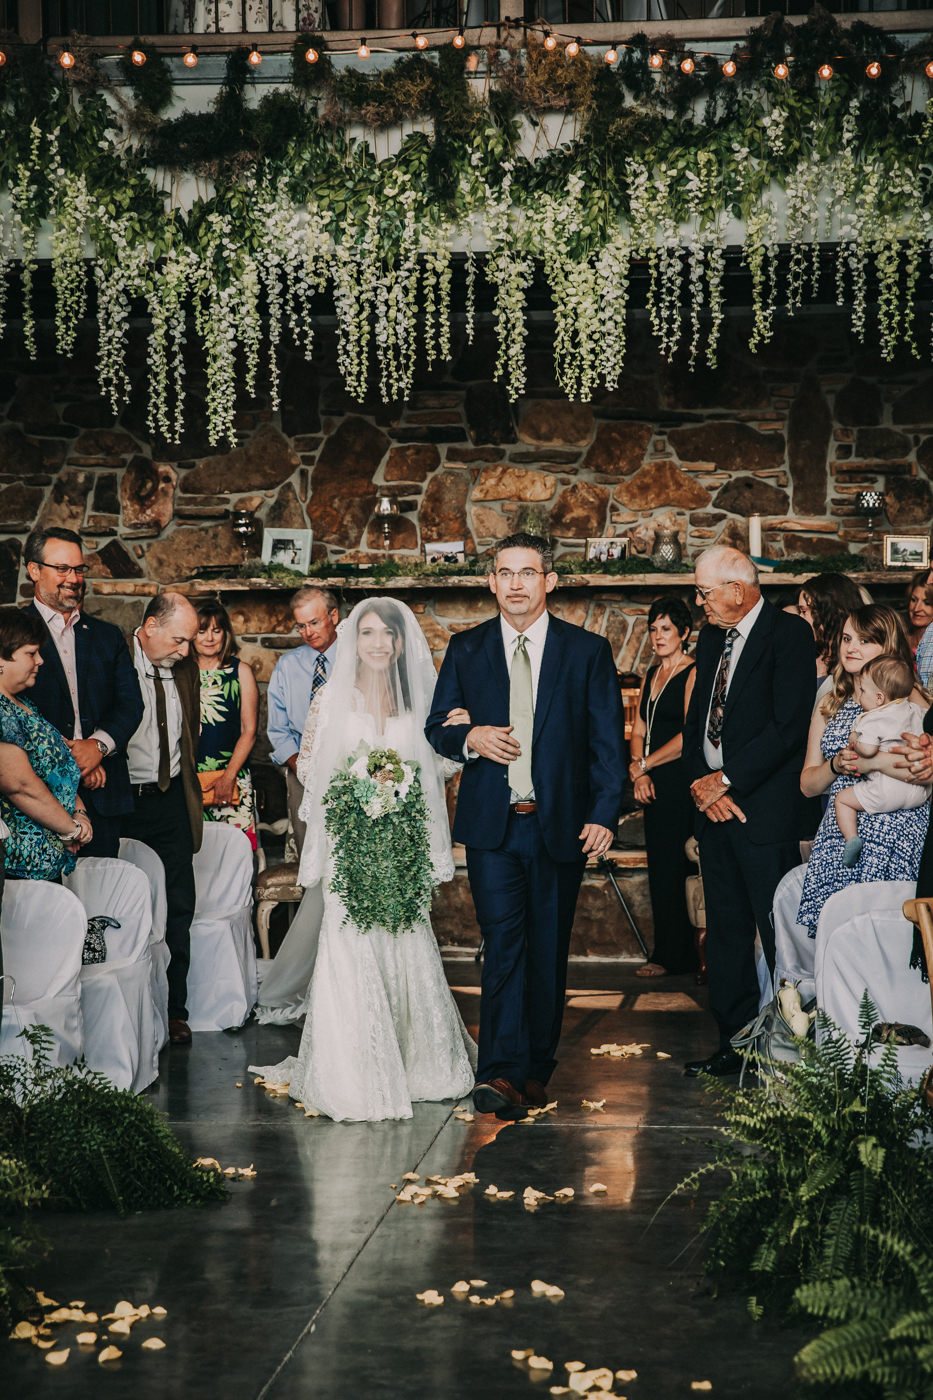 Burdoc Farms wedding by Billie-Shaye Style Photography featured on Nashville Bride Guide!